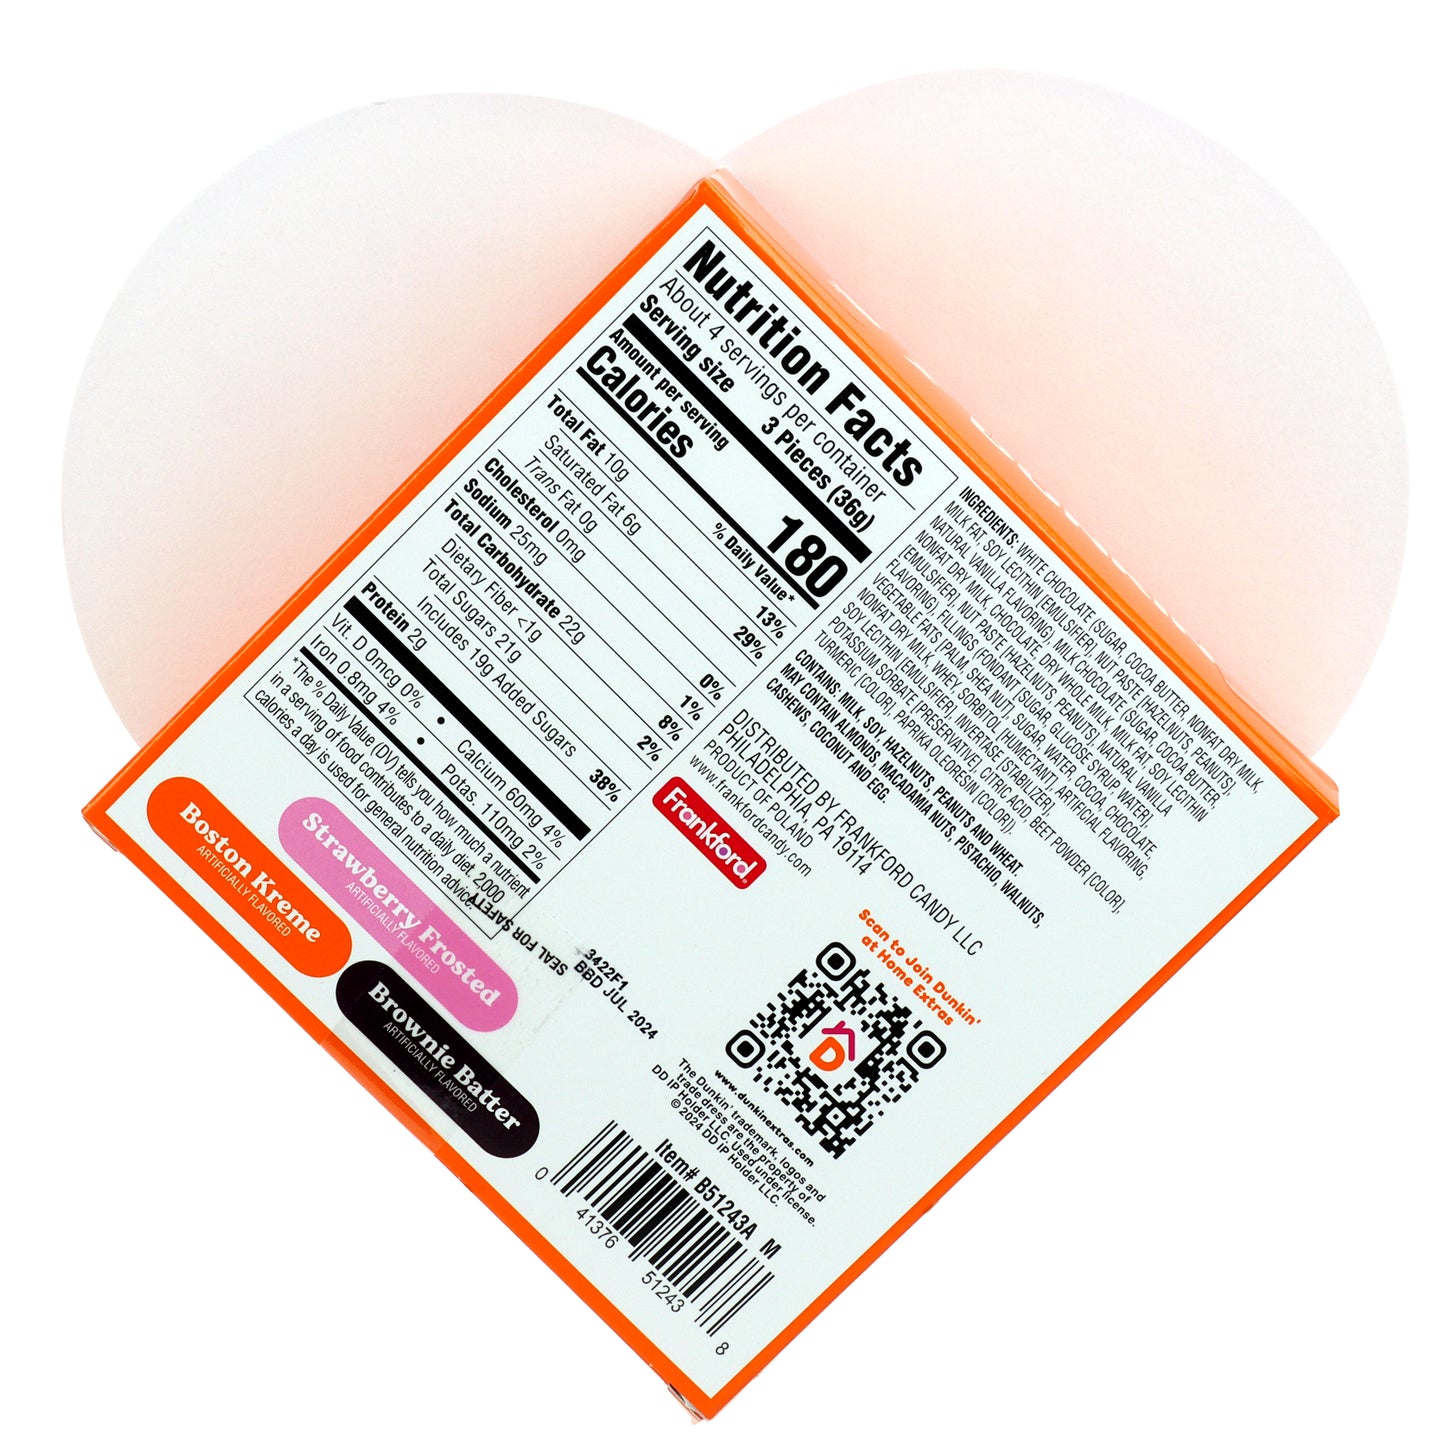 the back nutrition label on an orange box